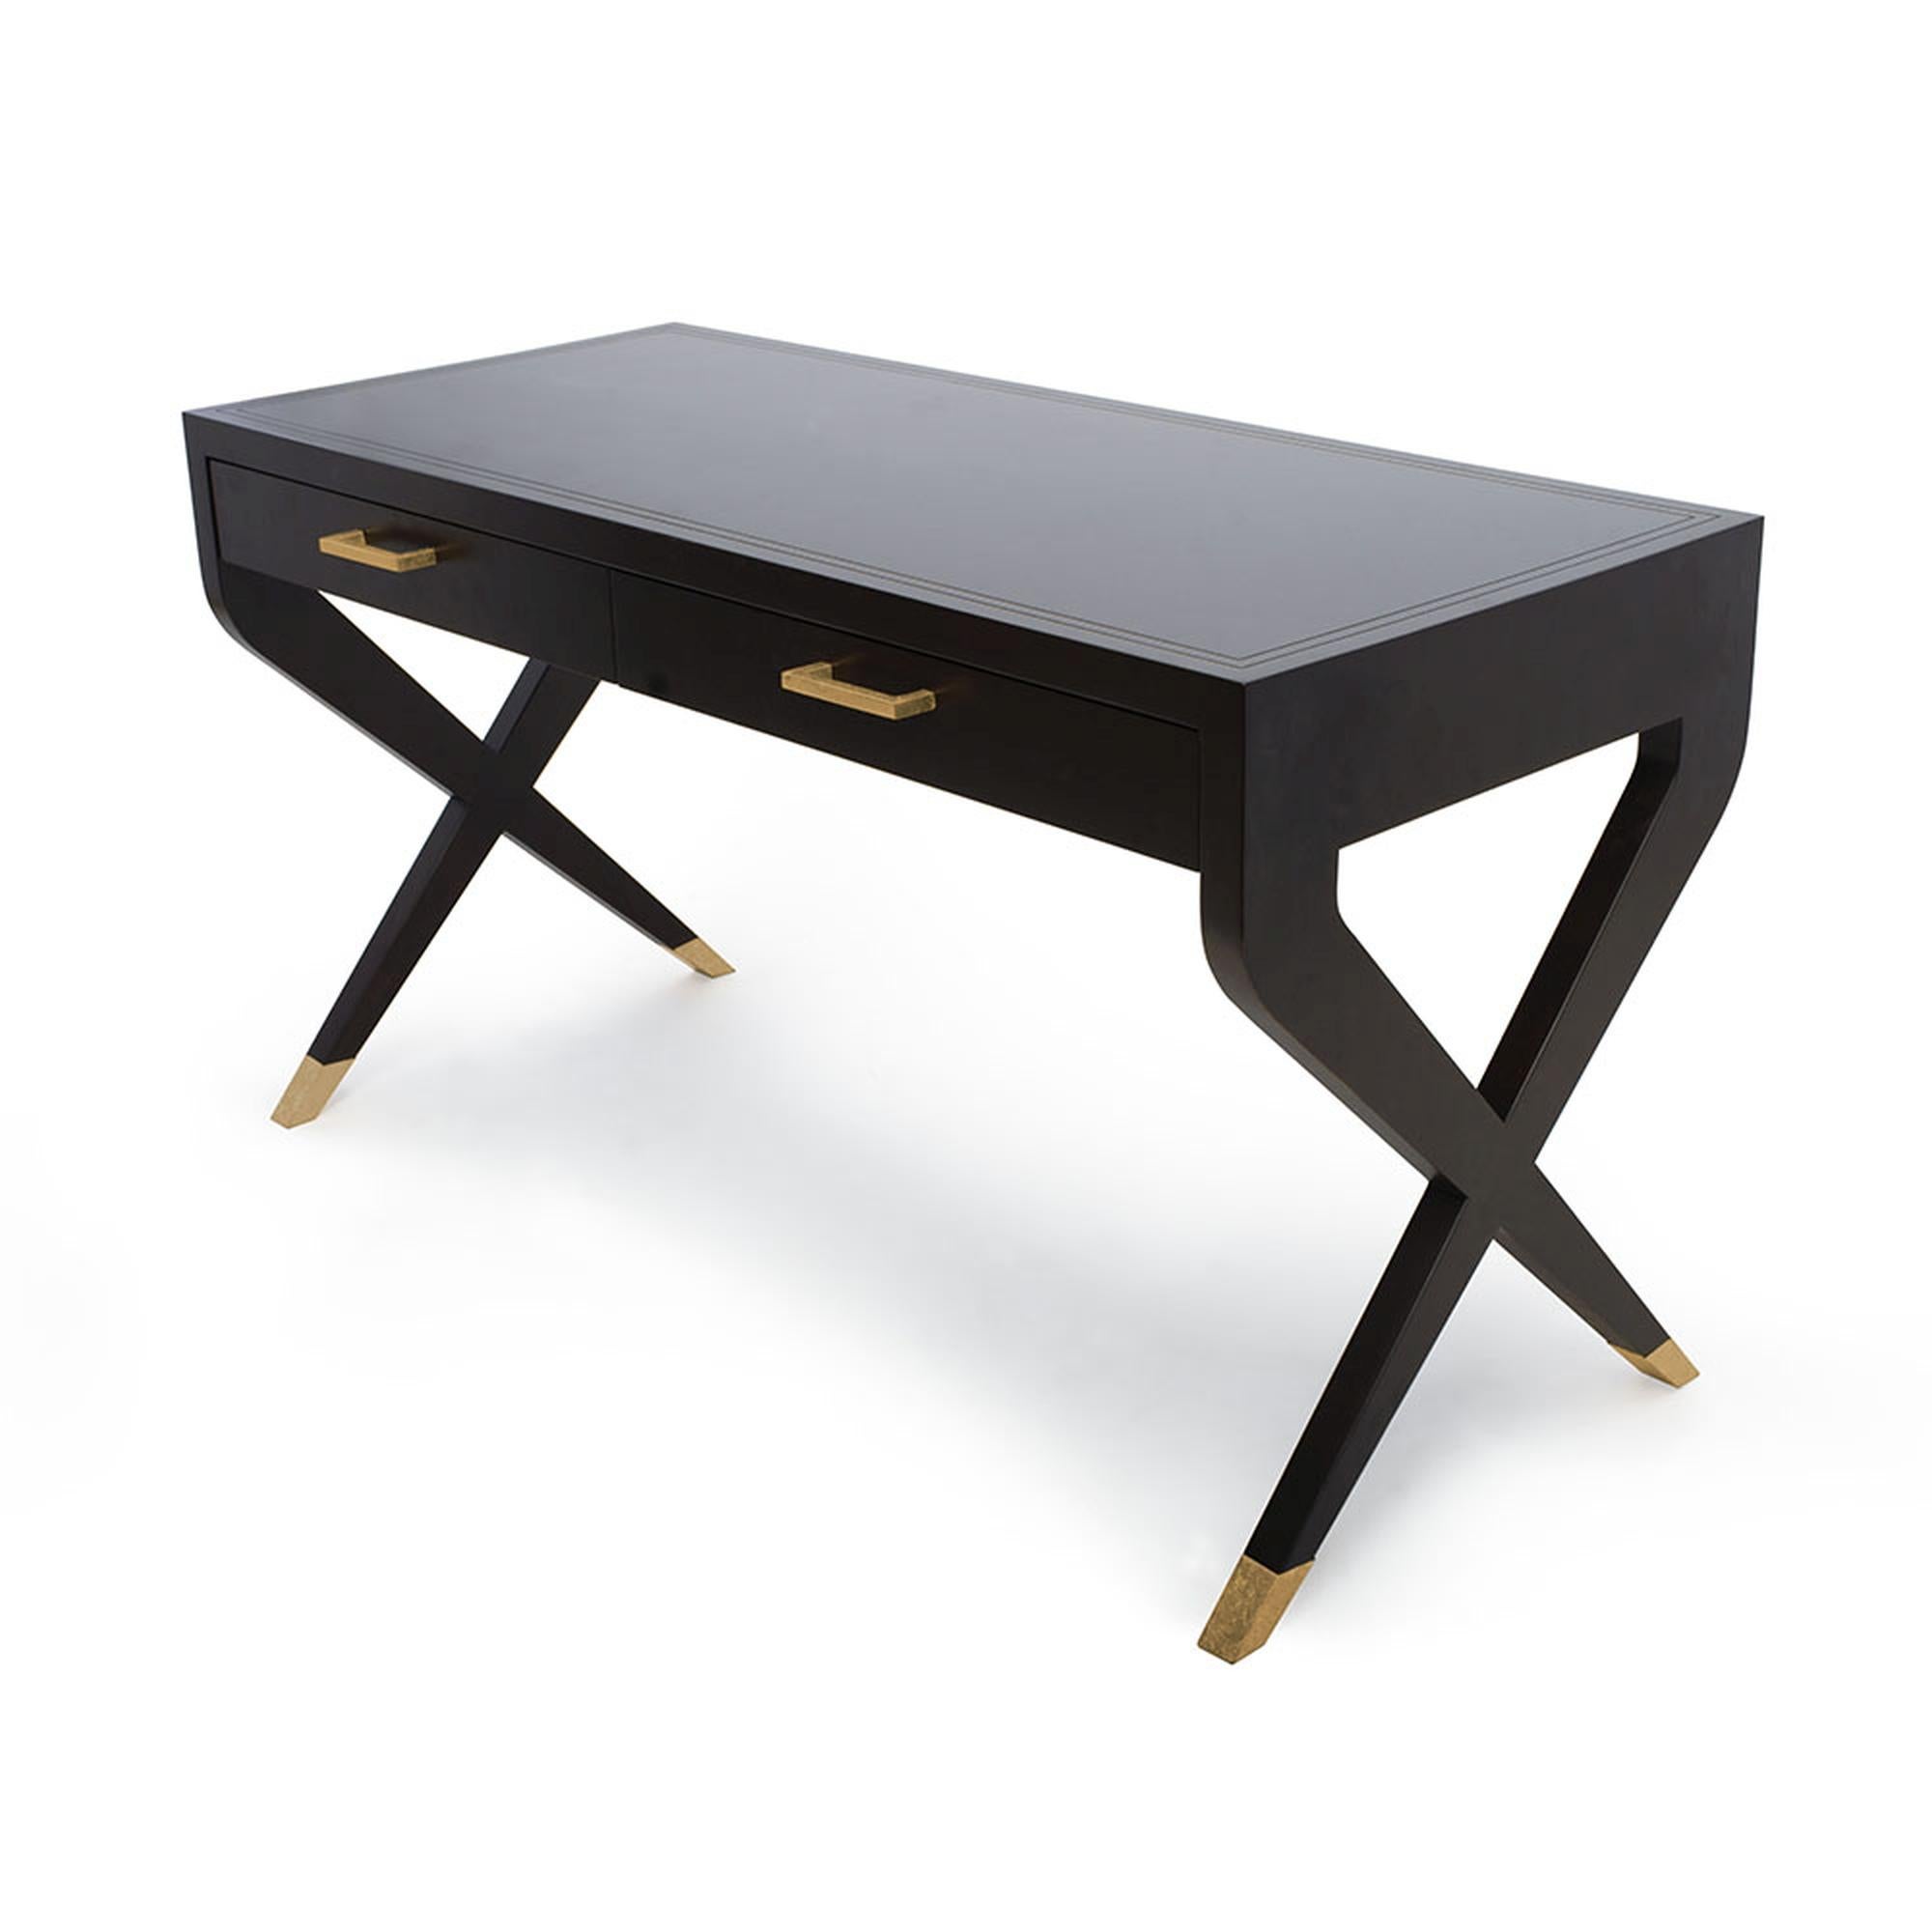 Modern elegance is perfected, with the Catalina desk. Its sleek and chic silhouette adds a sophisticated look to any bedroom or home office. The two legs at each side cross to form an “X”, and are delicately adorned with a metal sabot. Supported by